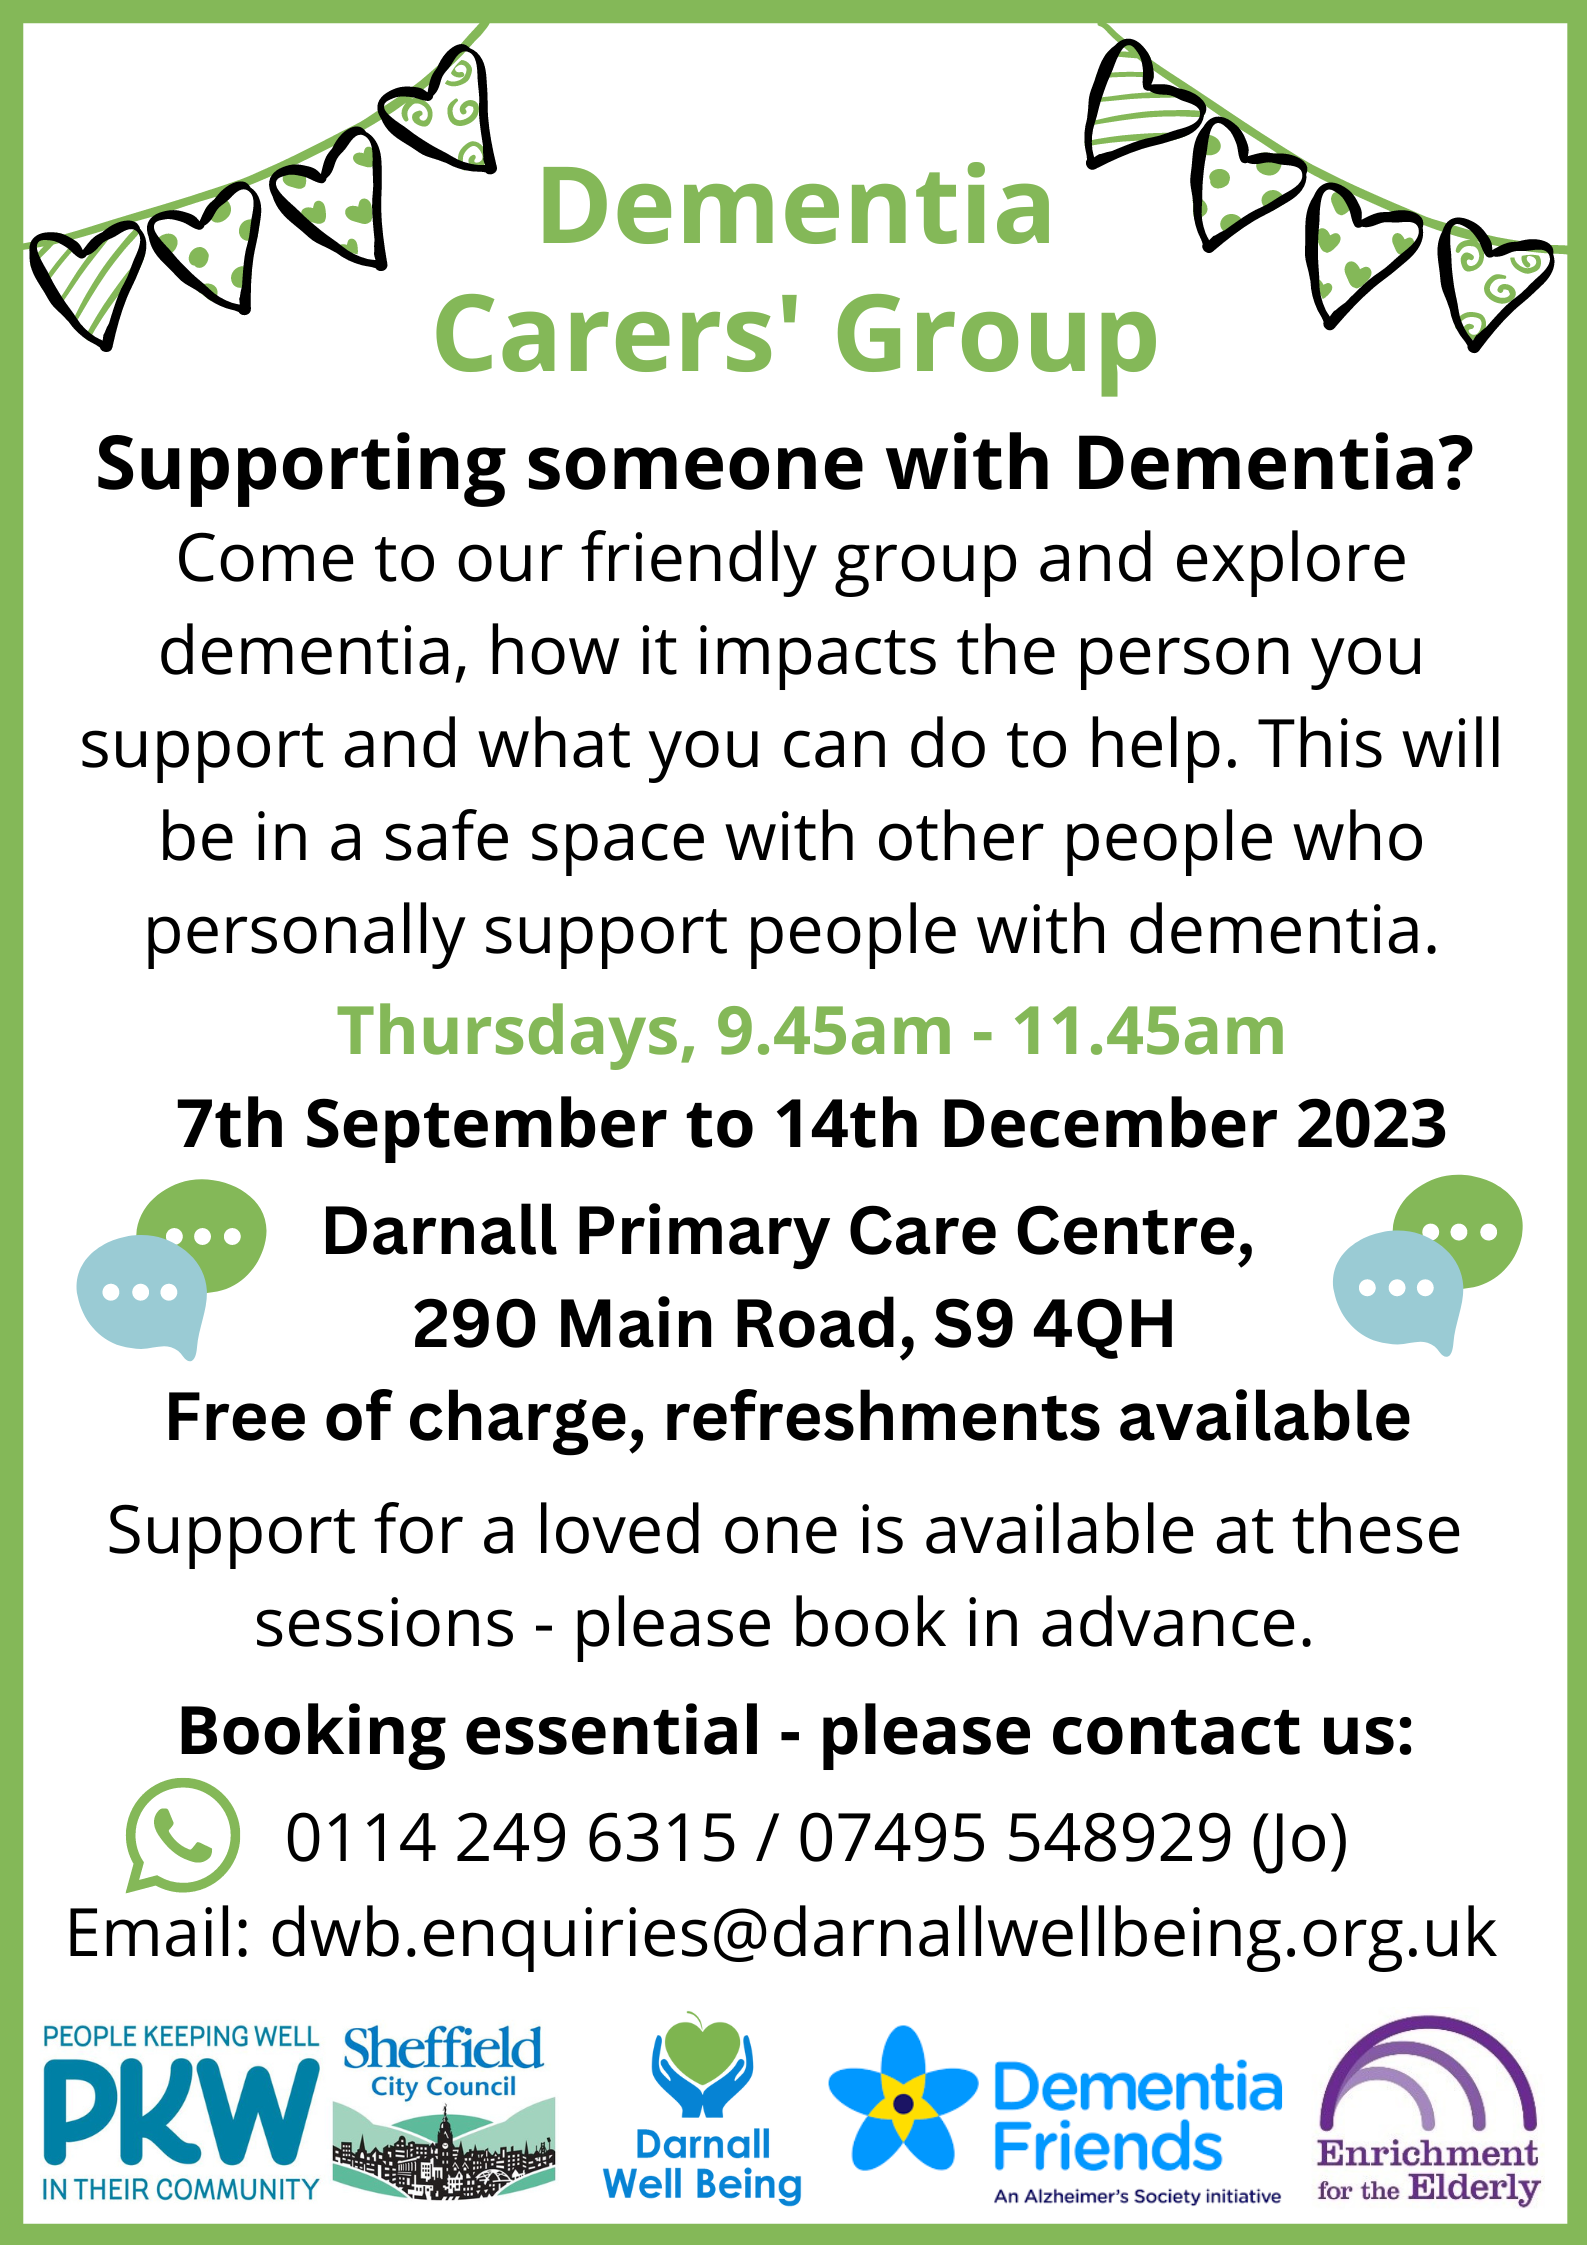 Dementia Carers' Group flyer